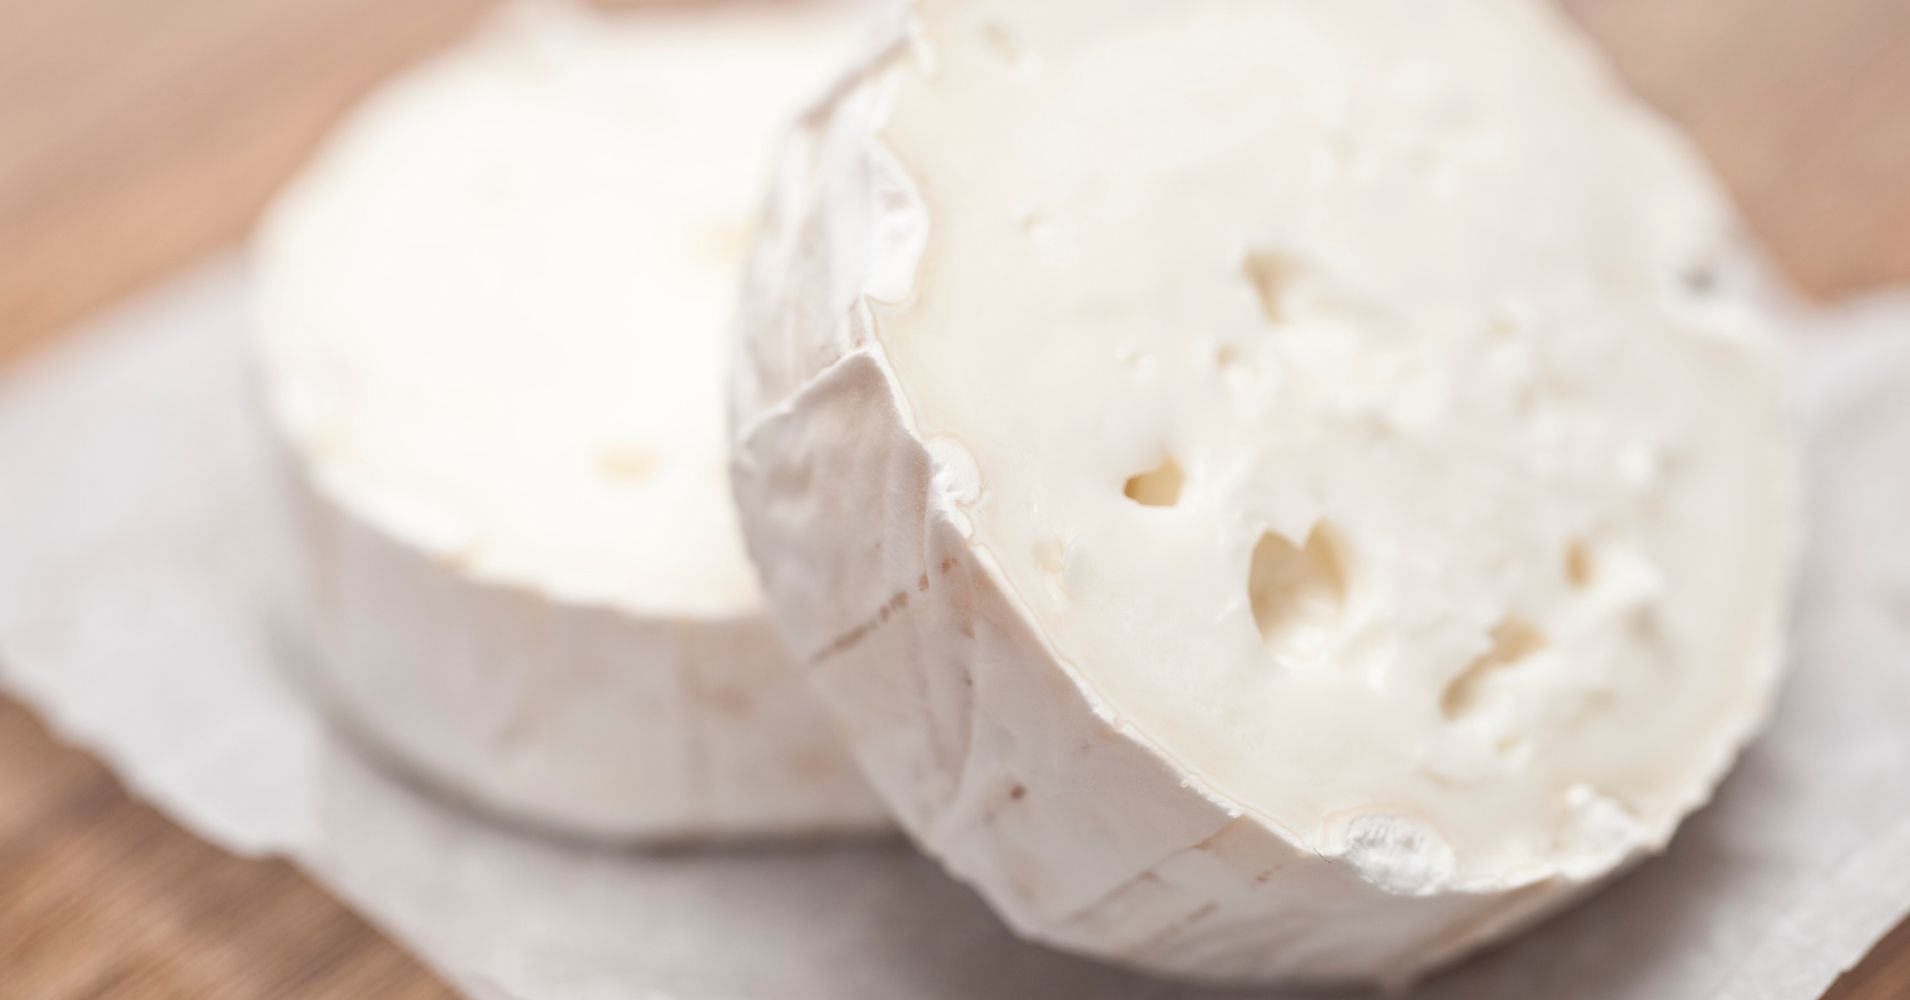 CDC Investigating Listeria Outbreak Linked To Contaminated Cheese ...